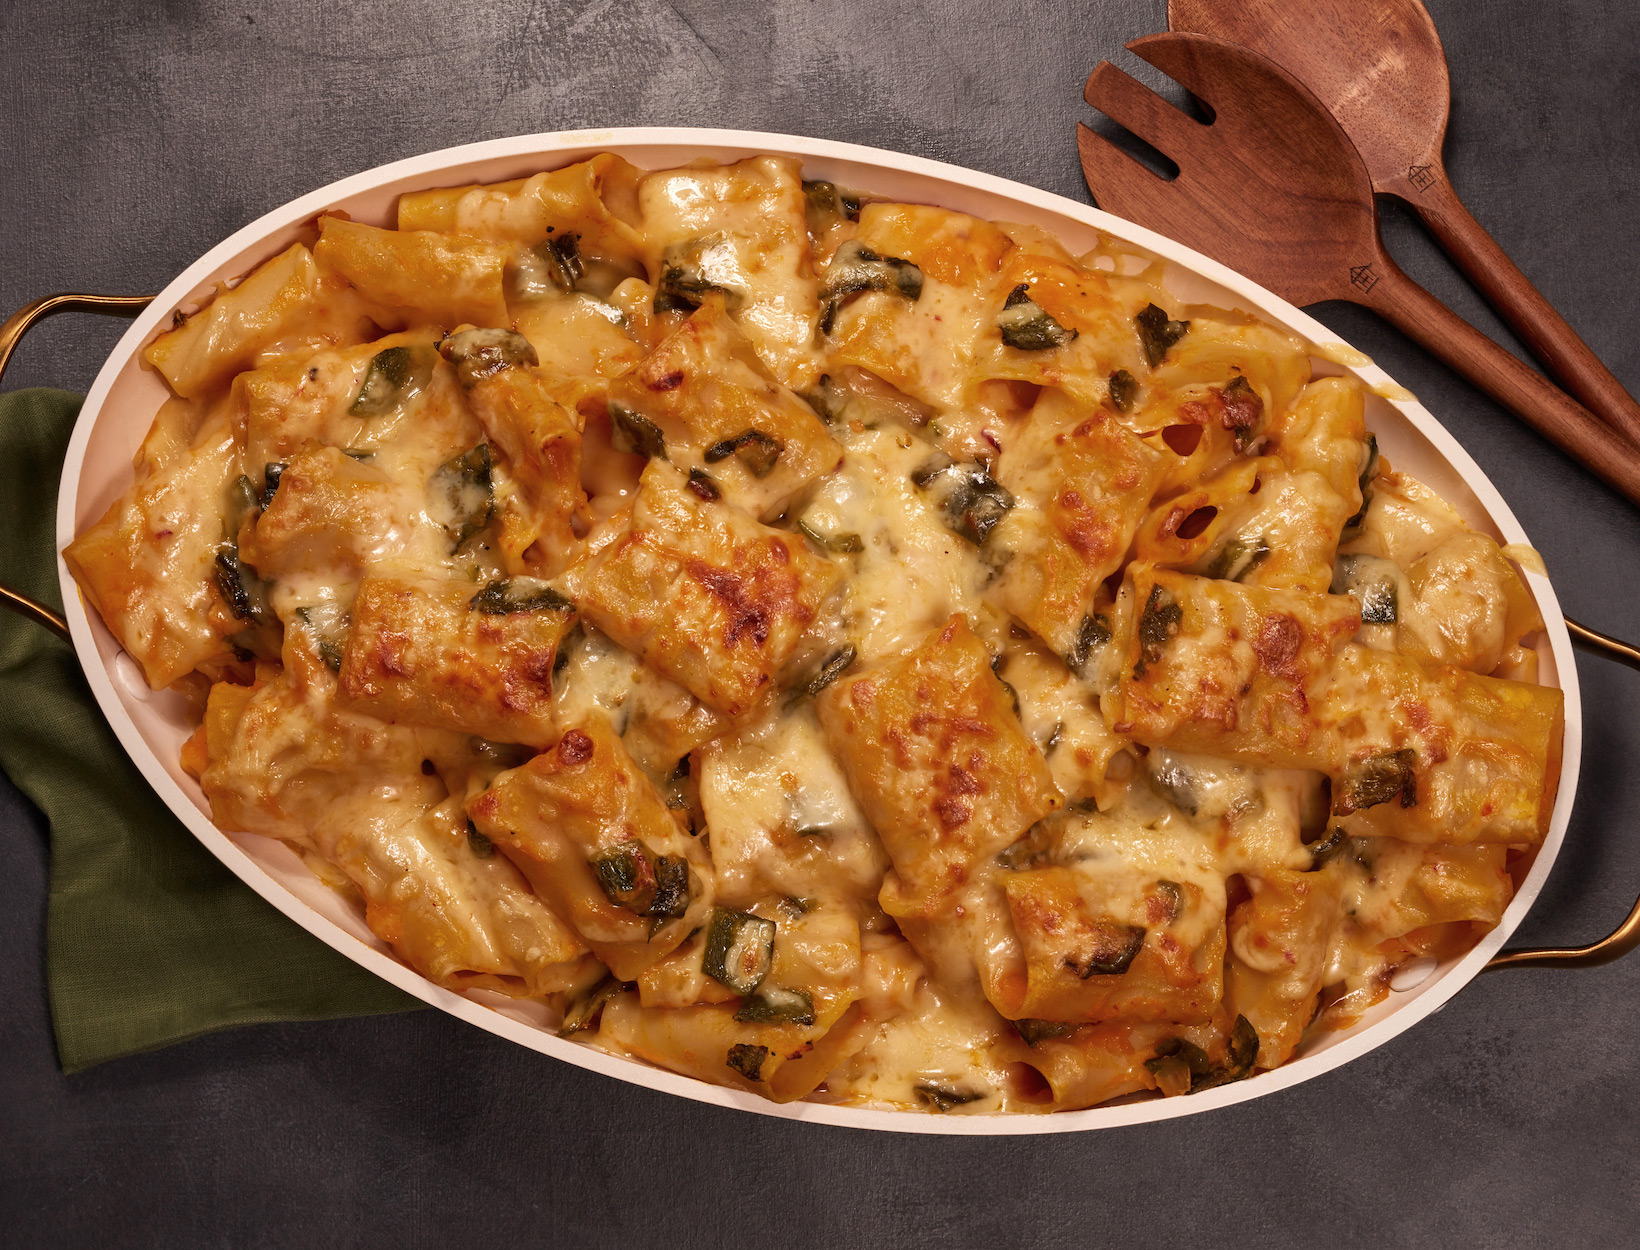 Smoky-Sweet Baked Pasta with Butternut Squash and Poblano Peppers